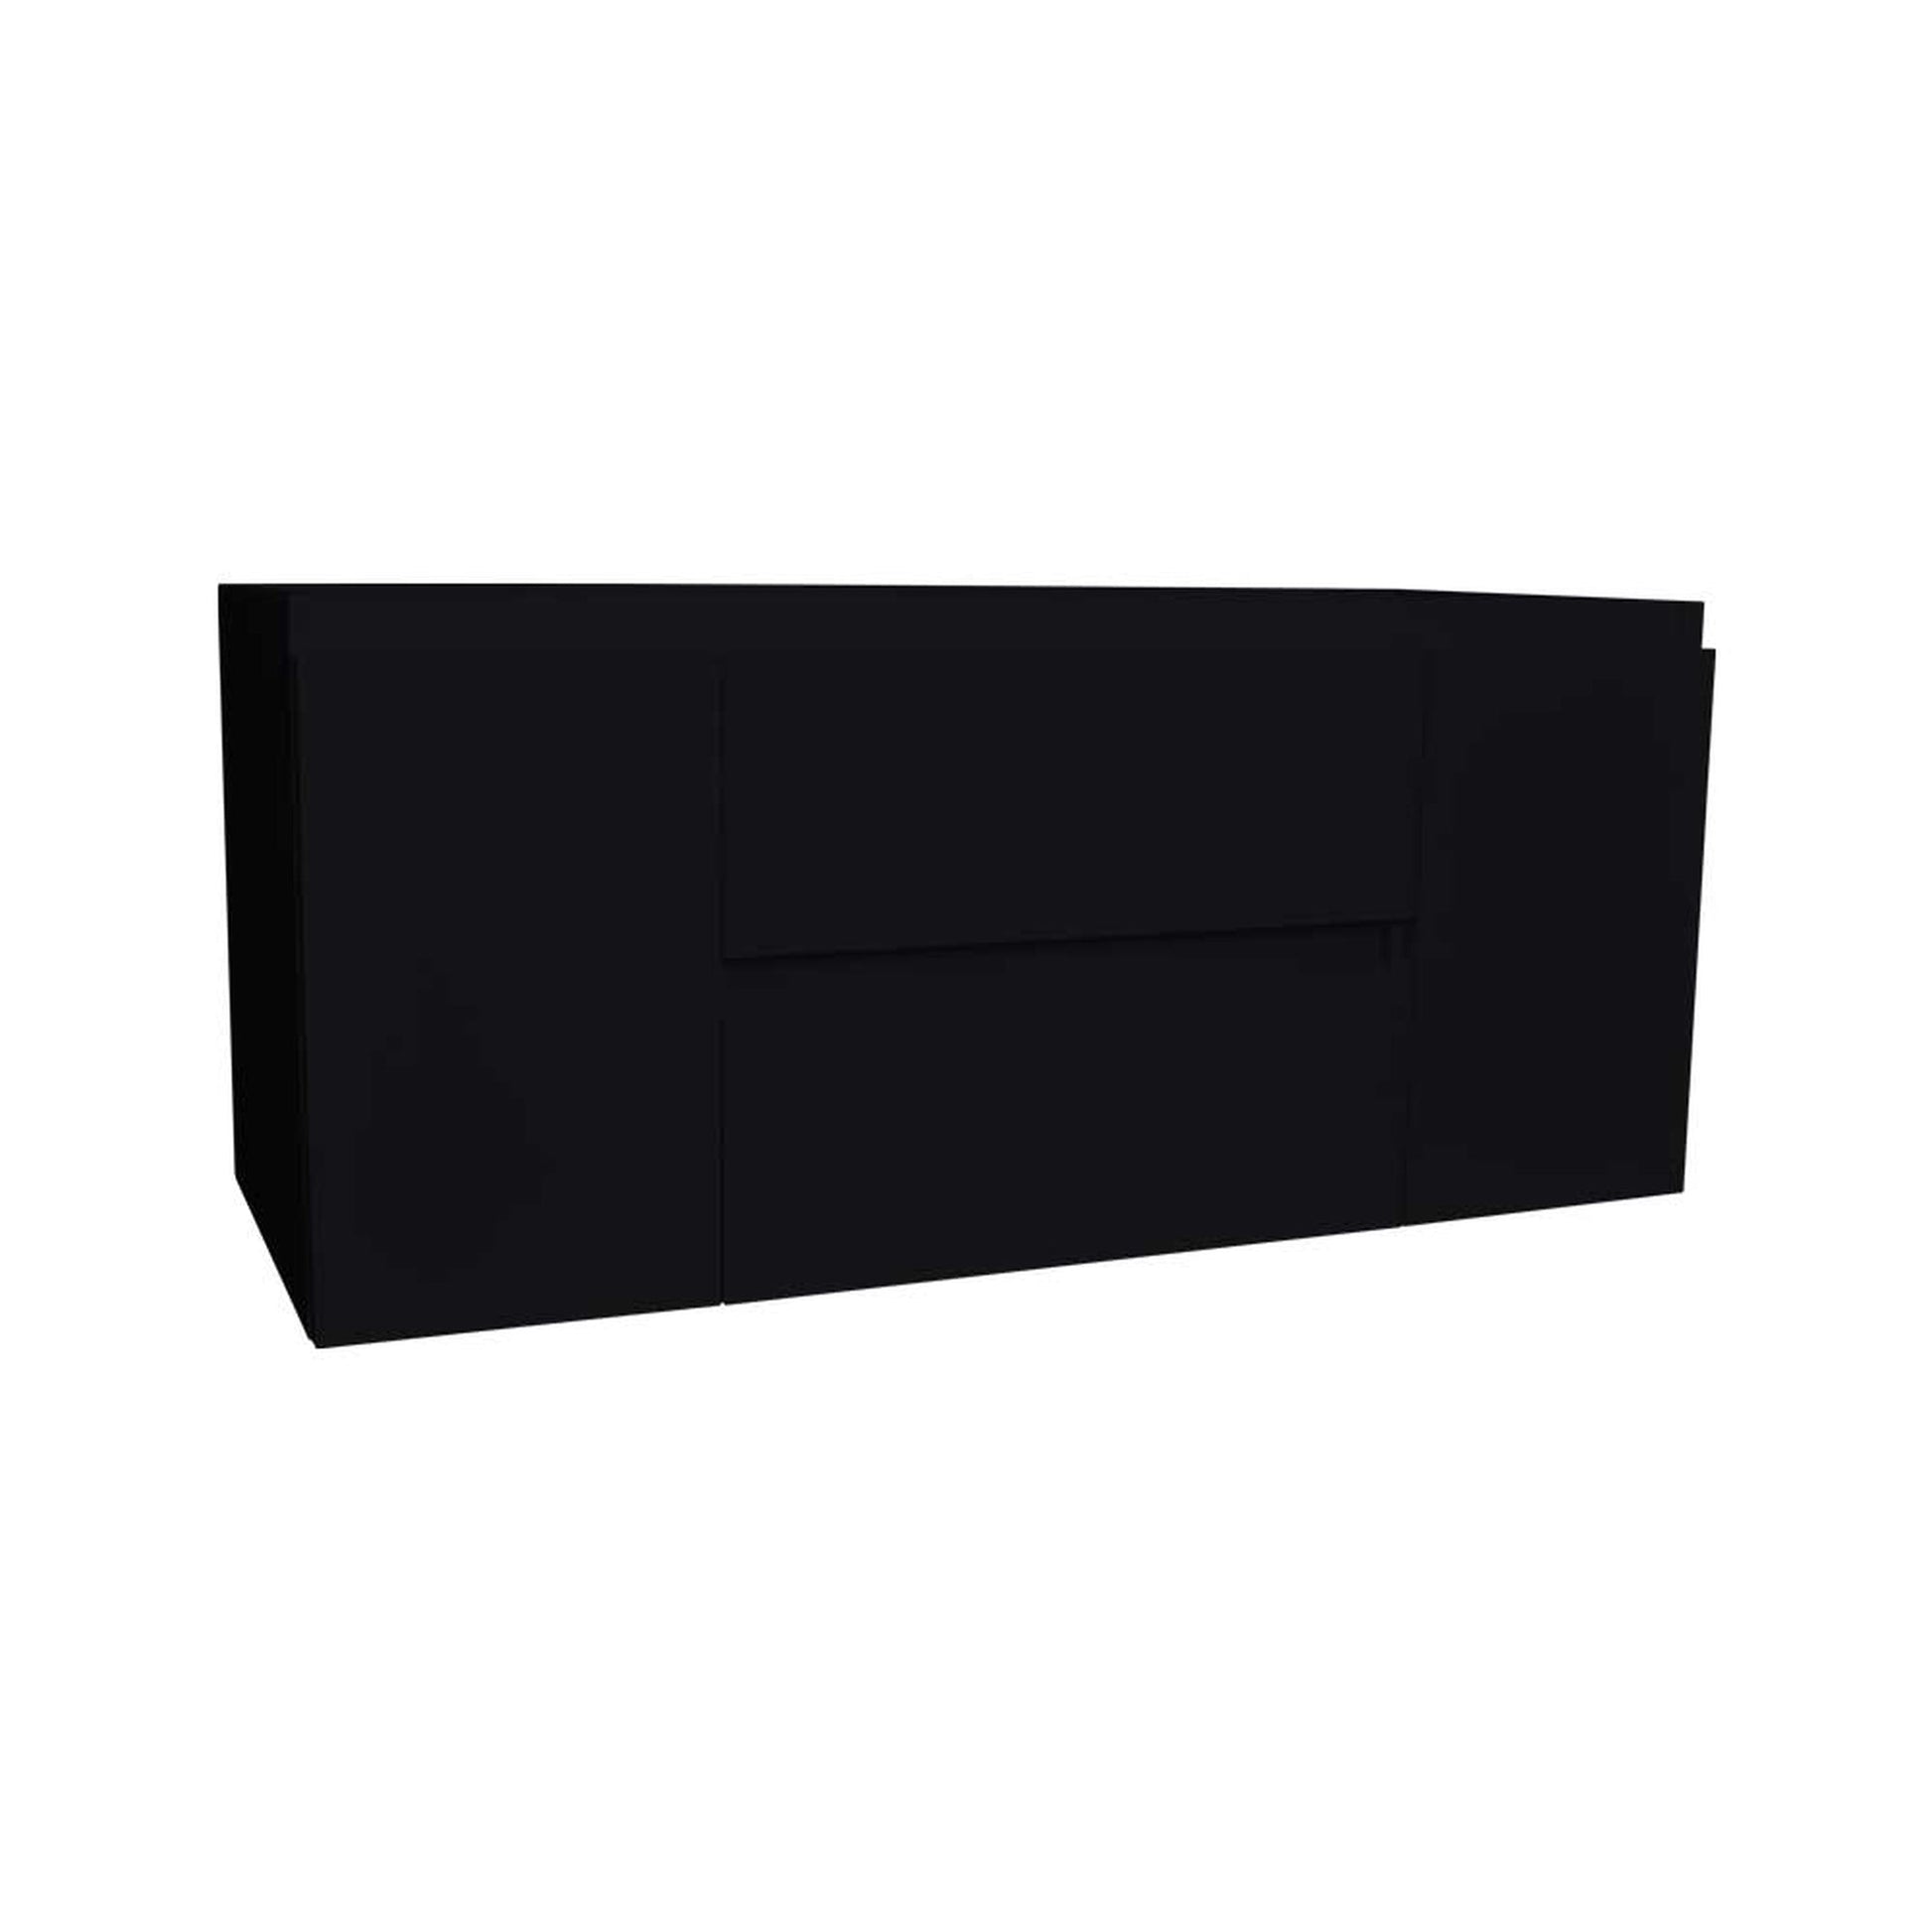 Volpa USA Salt 48" x 20" Glossy Black Wall-Mounted Floating Bathroom Vanity Cabinet with Drawers